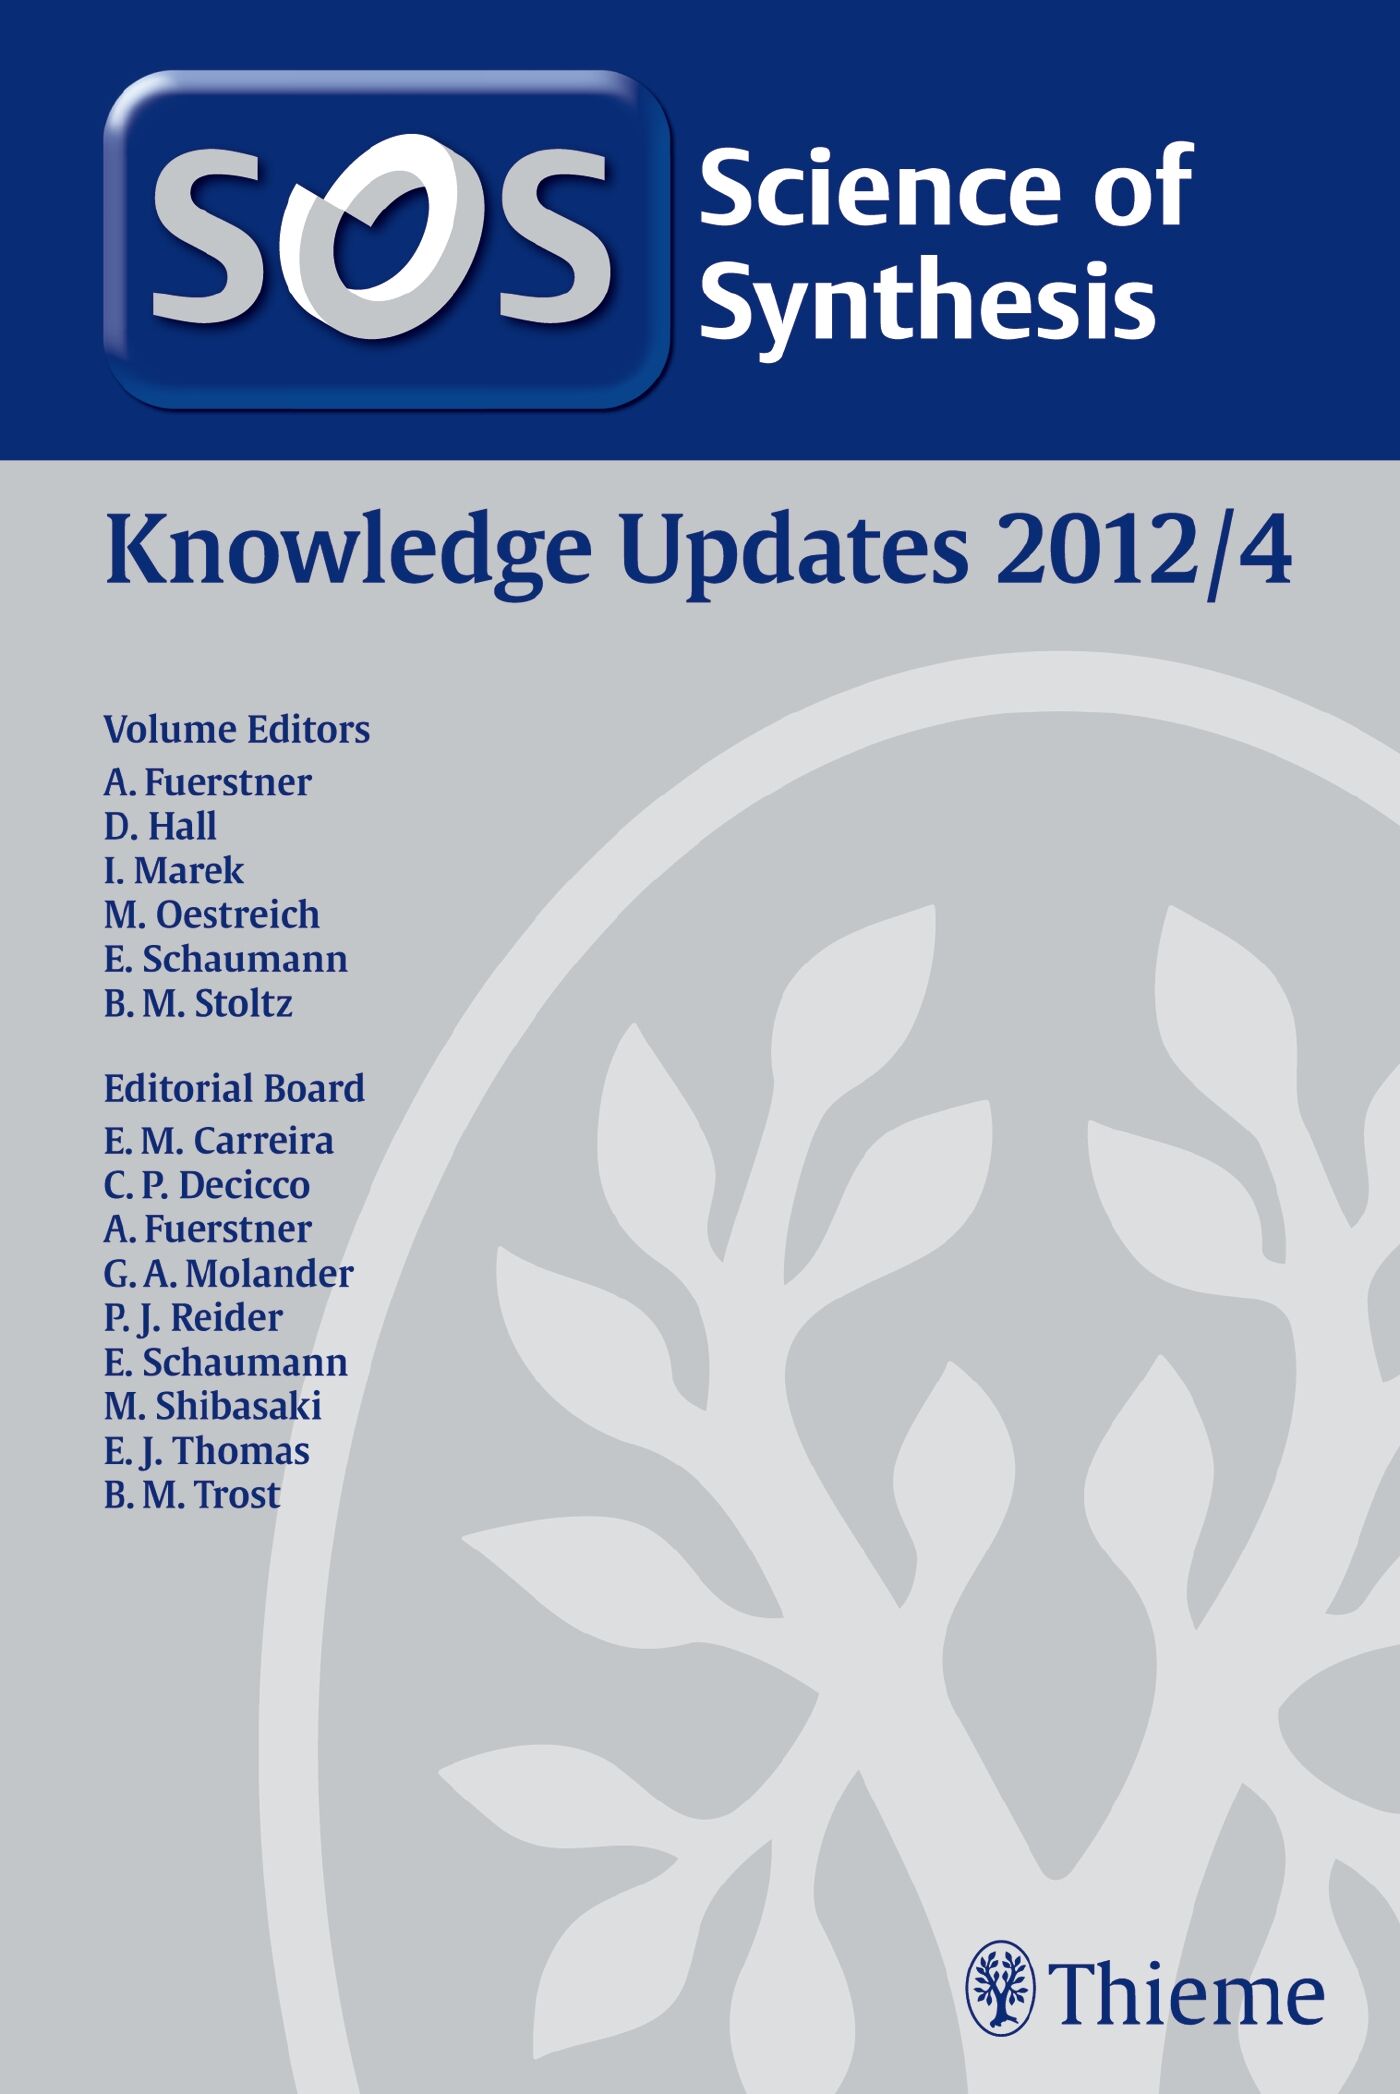 Science of Synthesis Knowledge Updates 2012 Vol. 4, 9783131672513